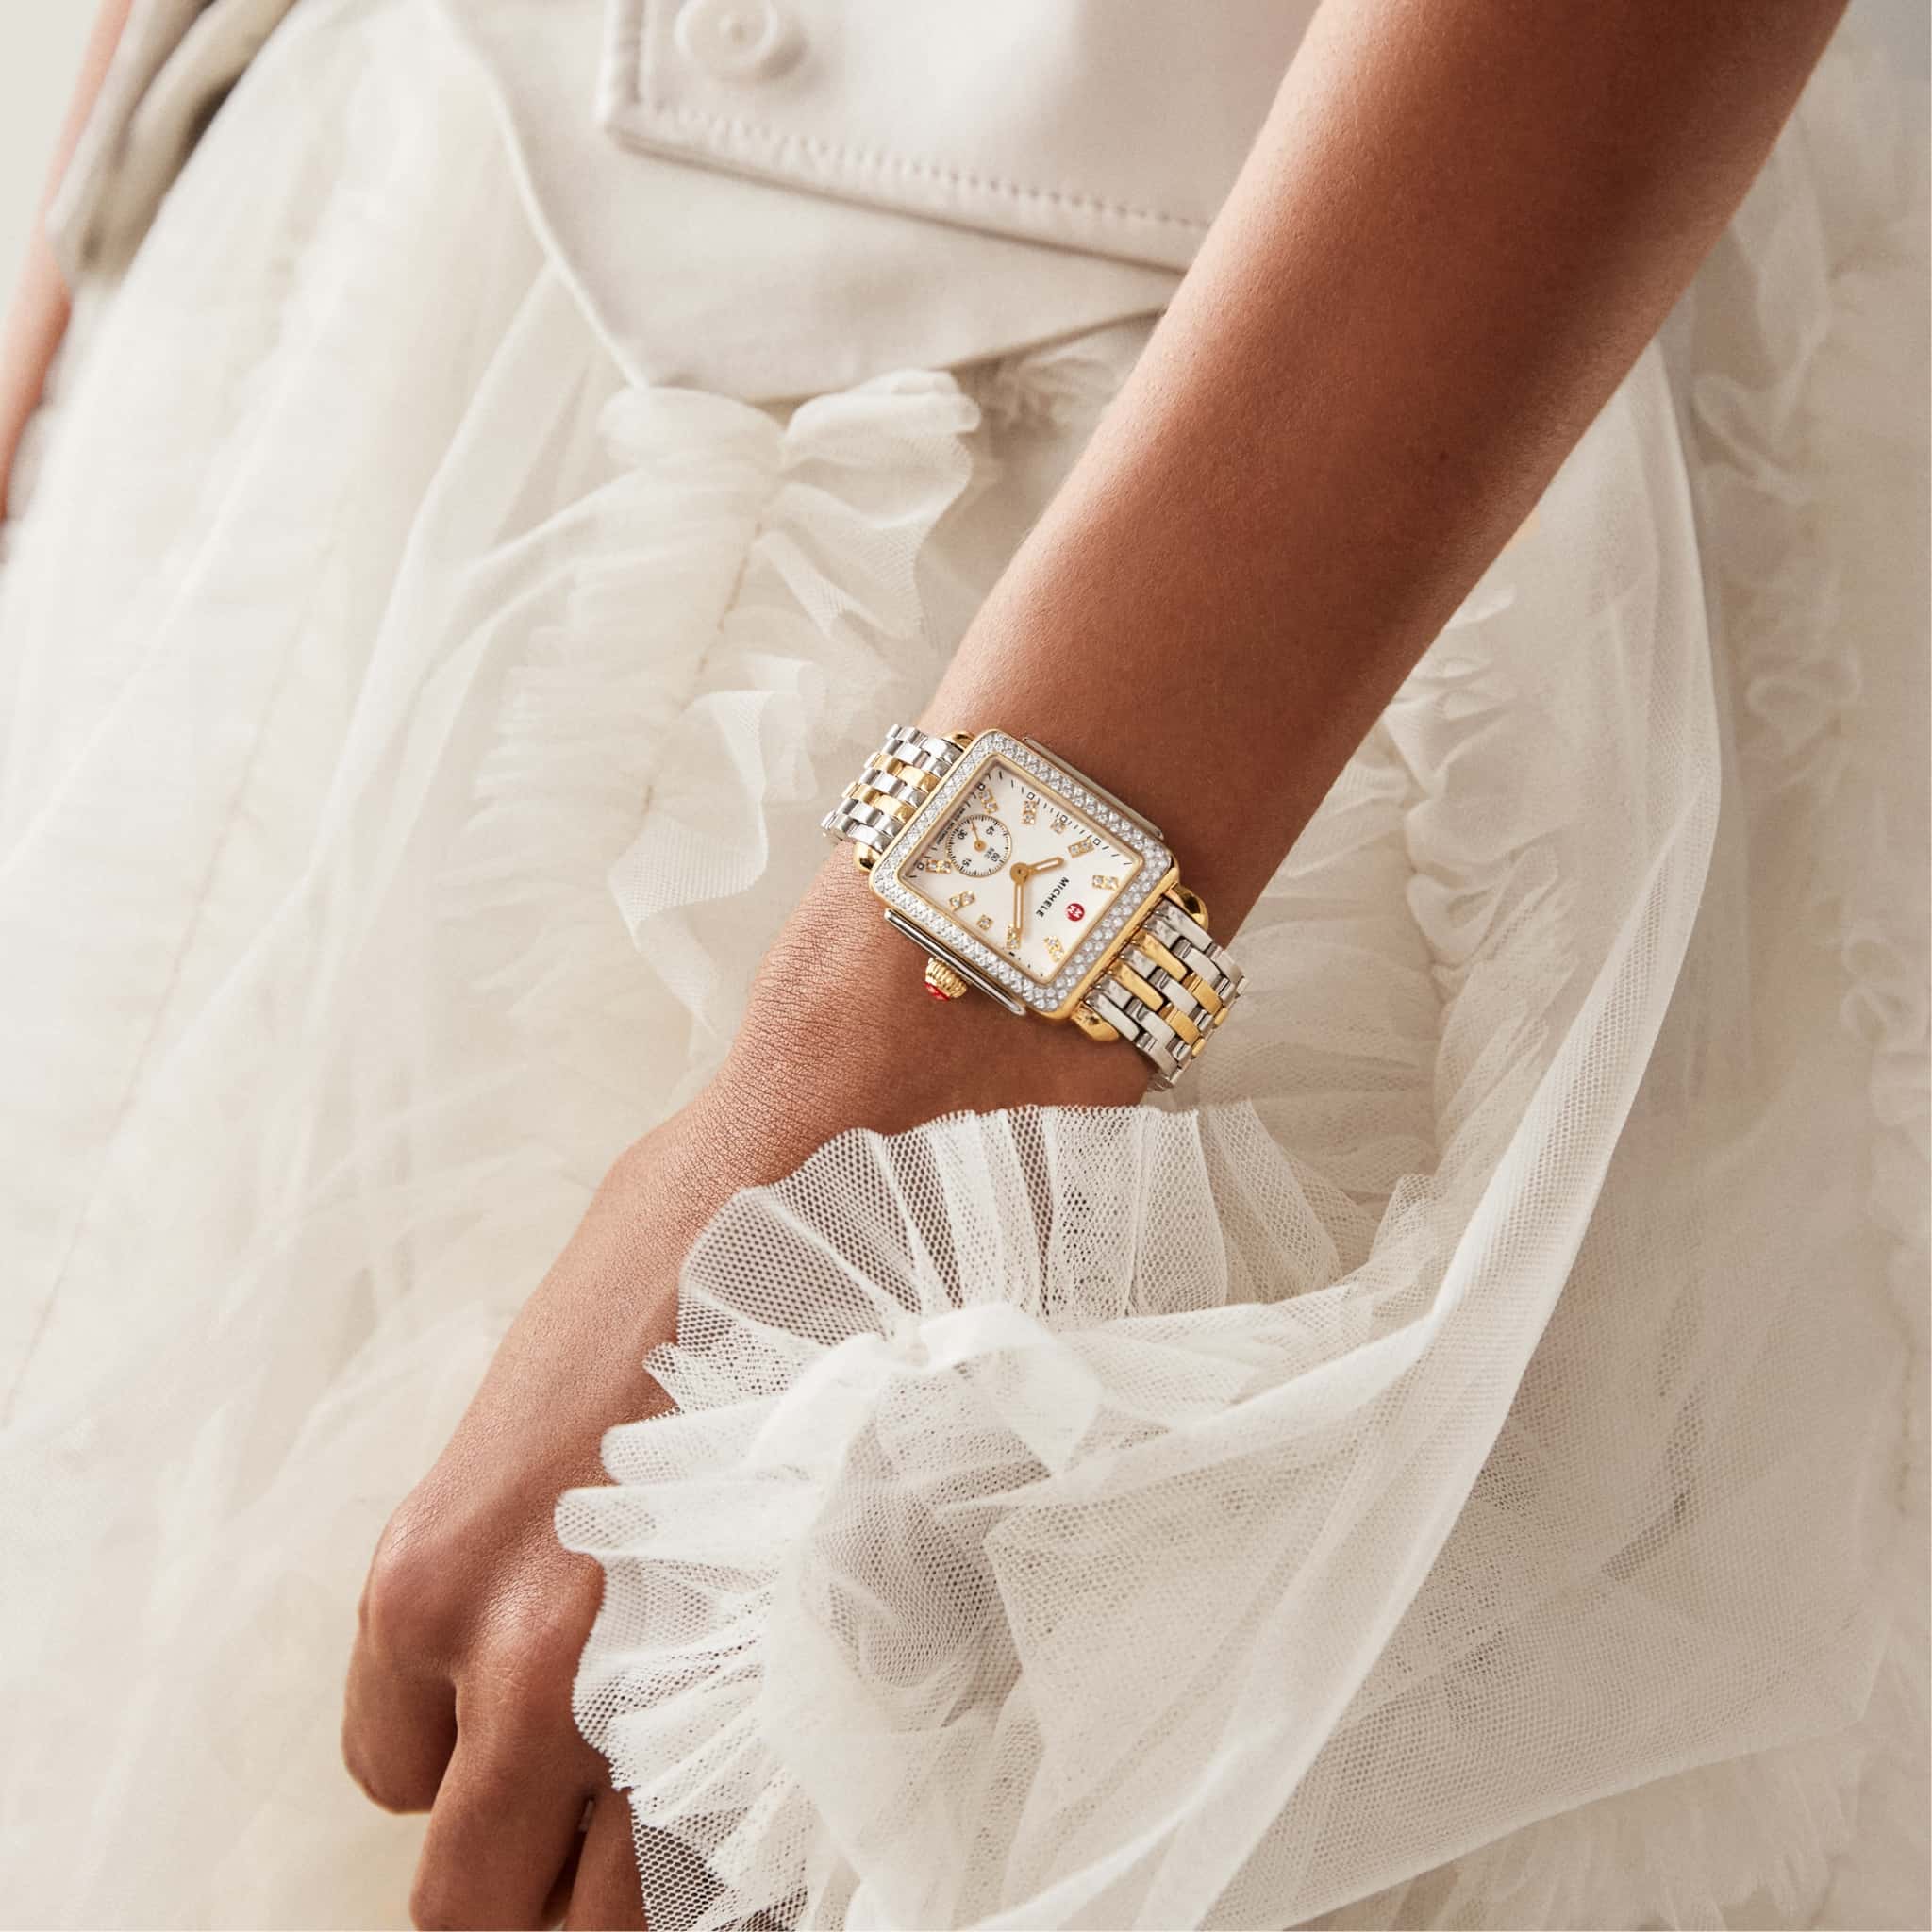 Bridal shot featuring a MICHELE Deco watch 